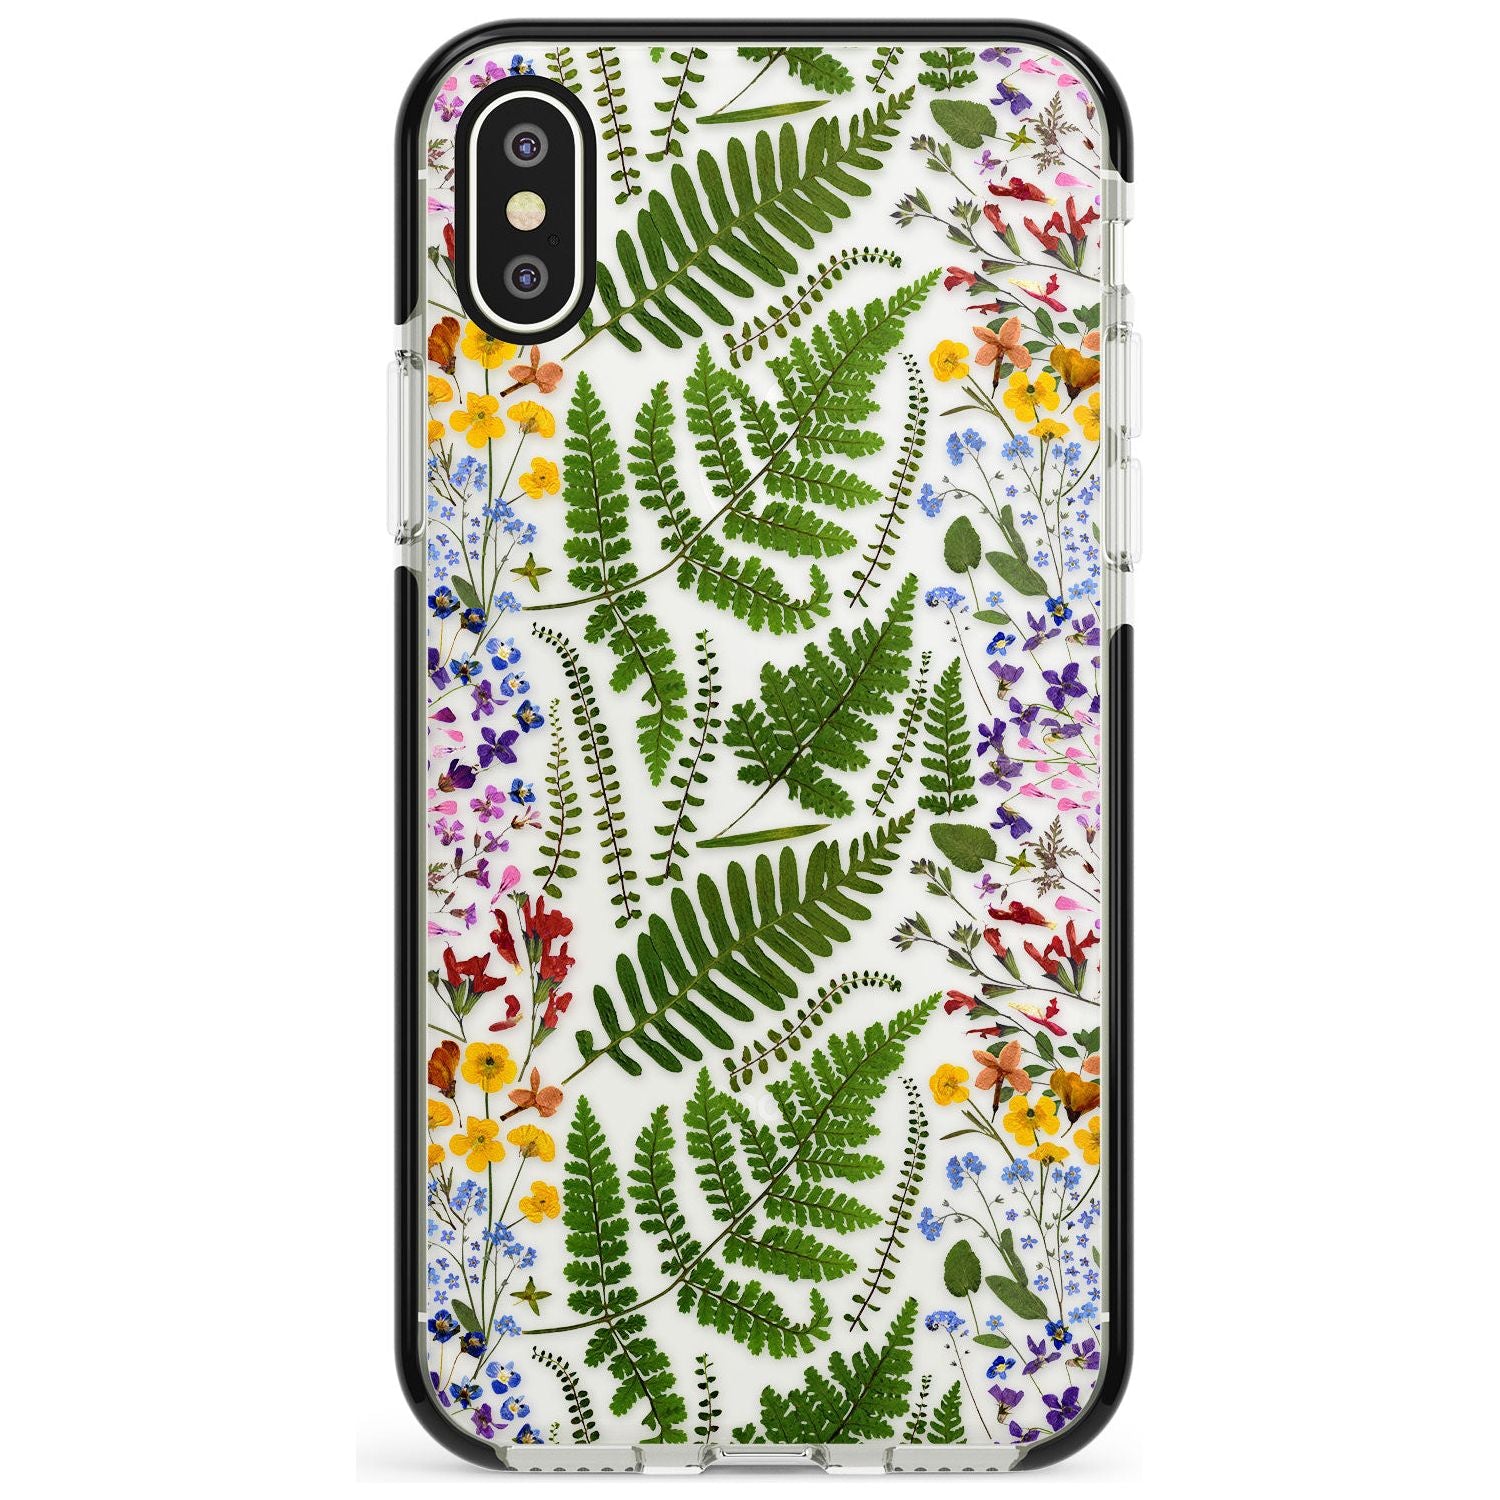 Busy Floral and Fern Design Black Impact Phone Case for iPhone X XS Max XR